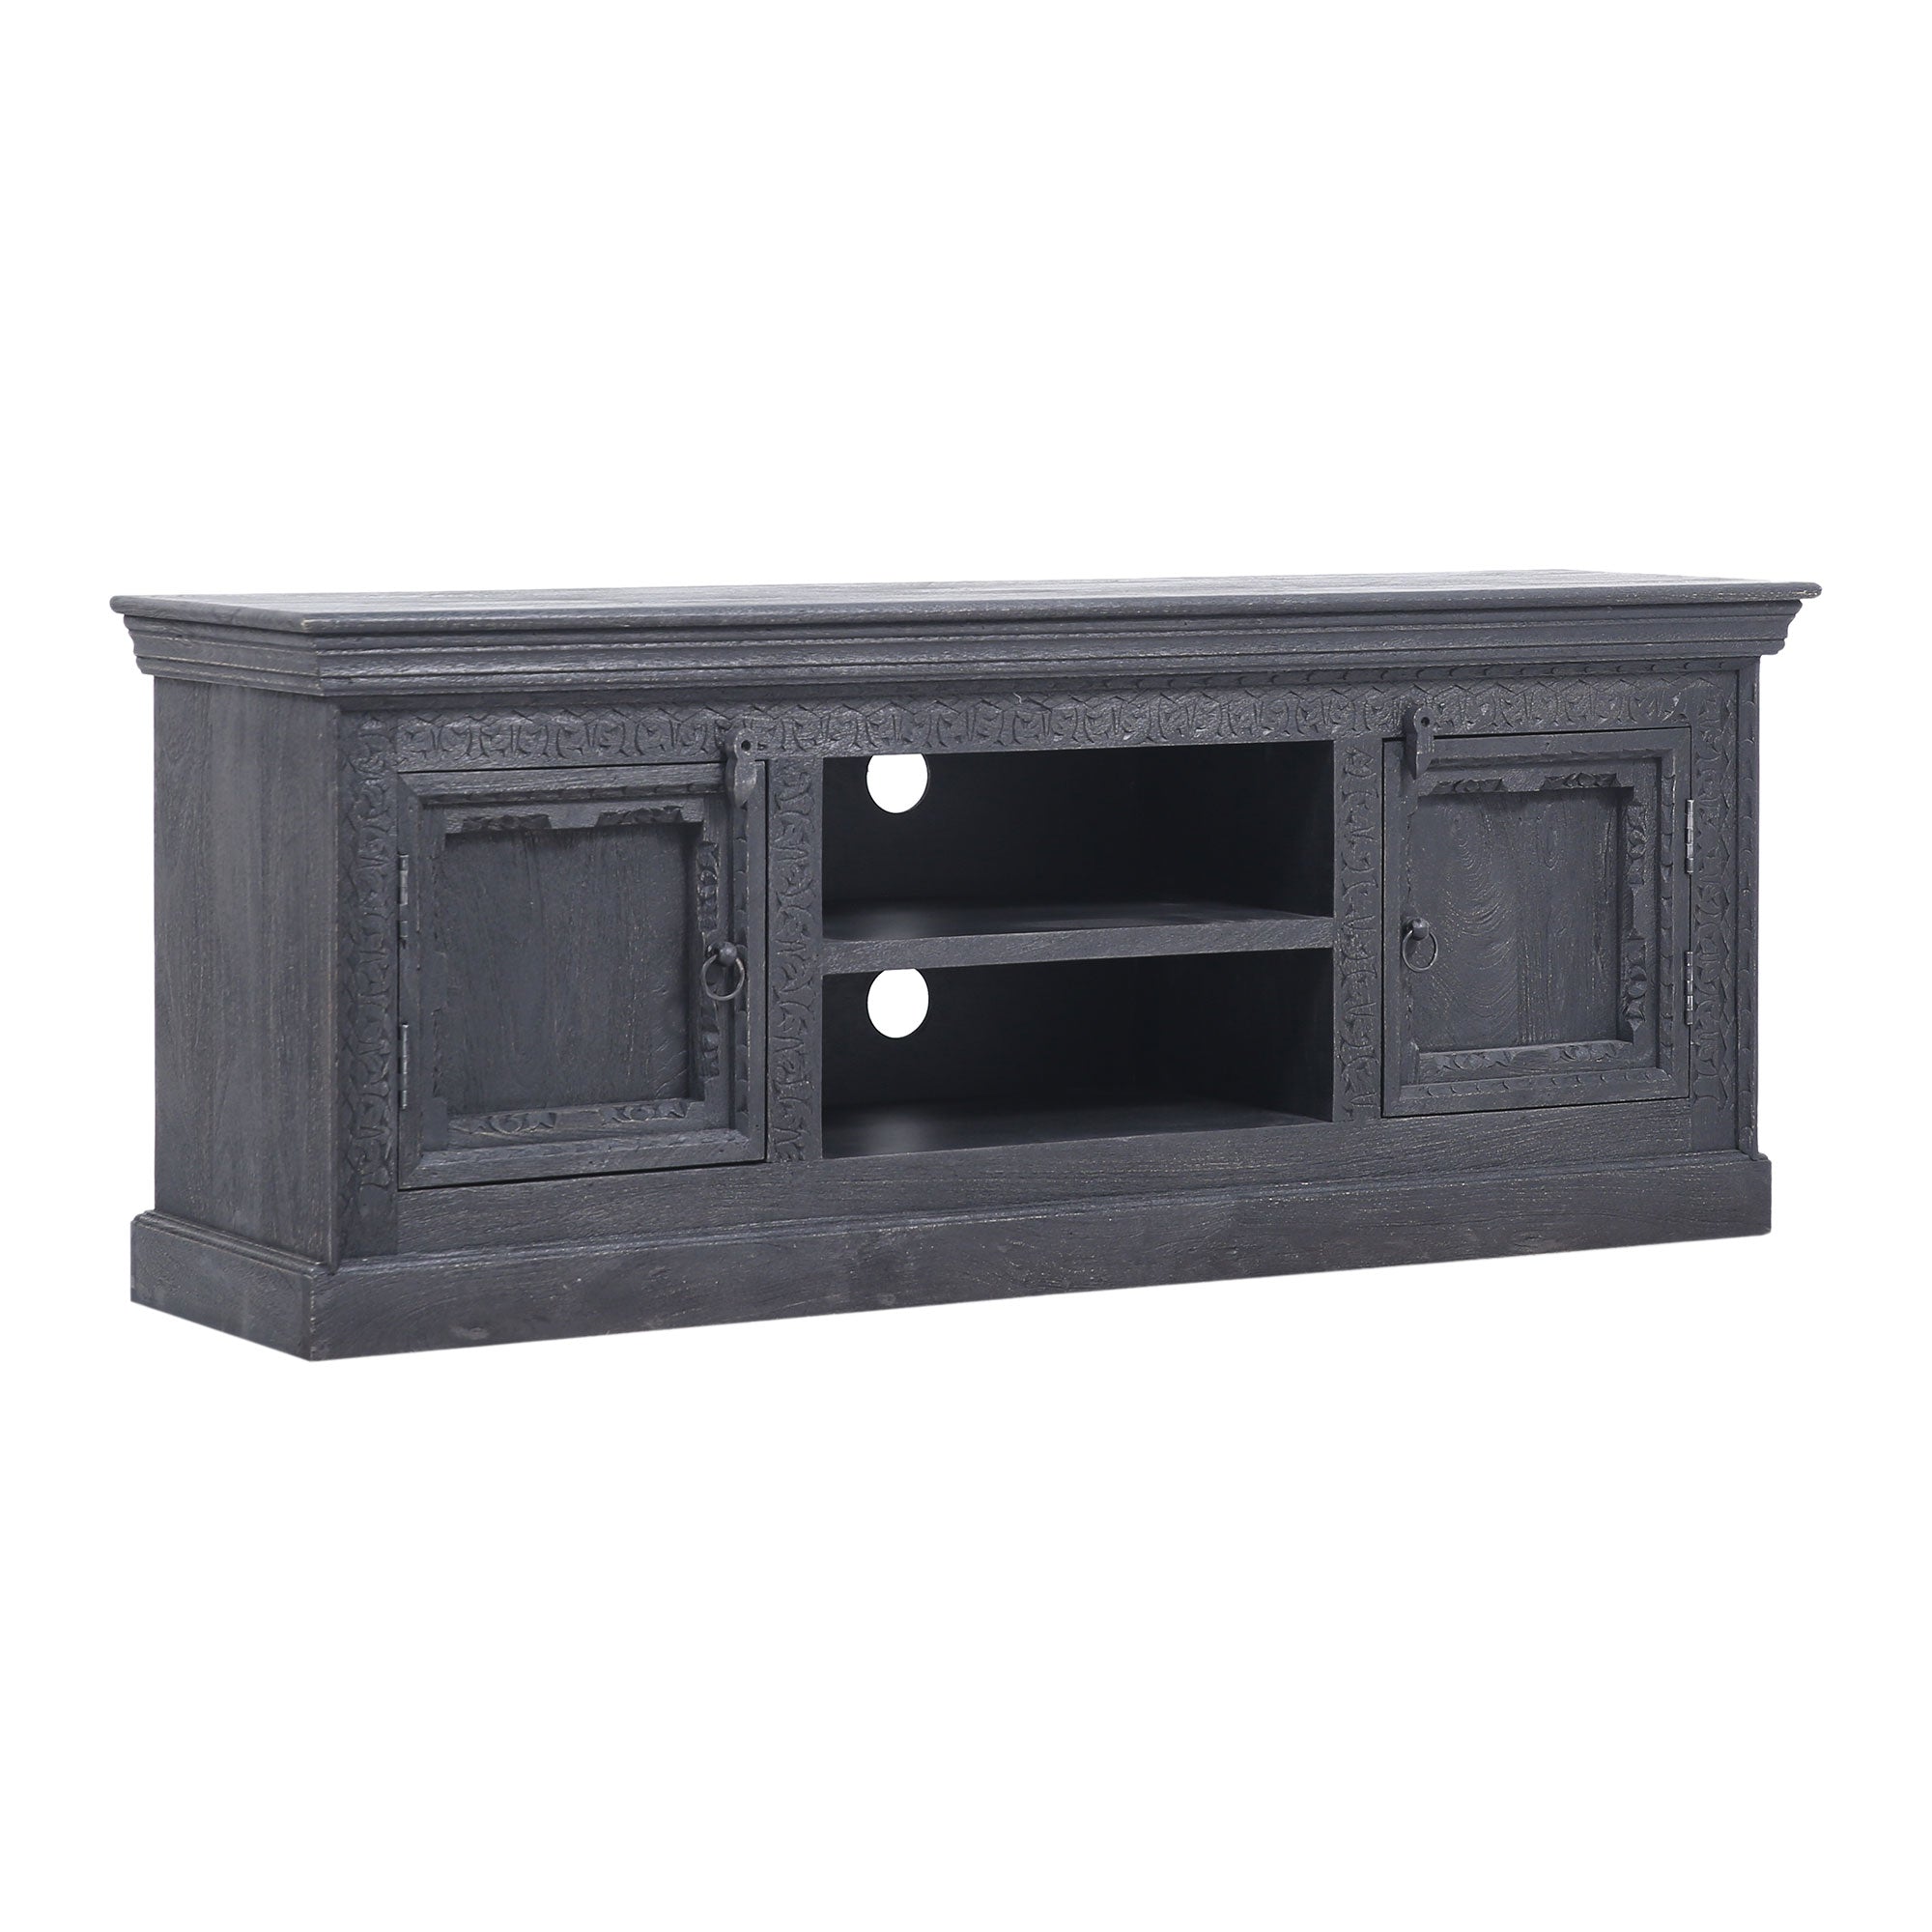 Mahala Nomad Wooden Media Unit in Distressed Black Finish in Media Units by VMInnovations